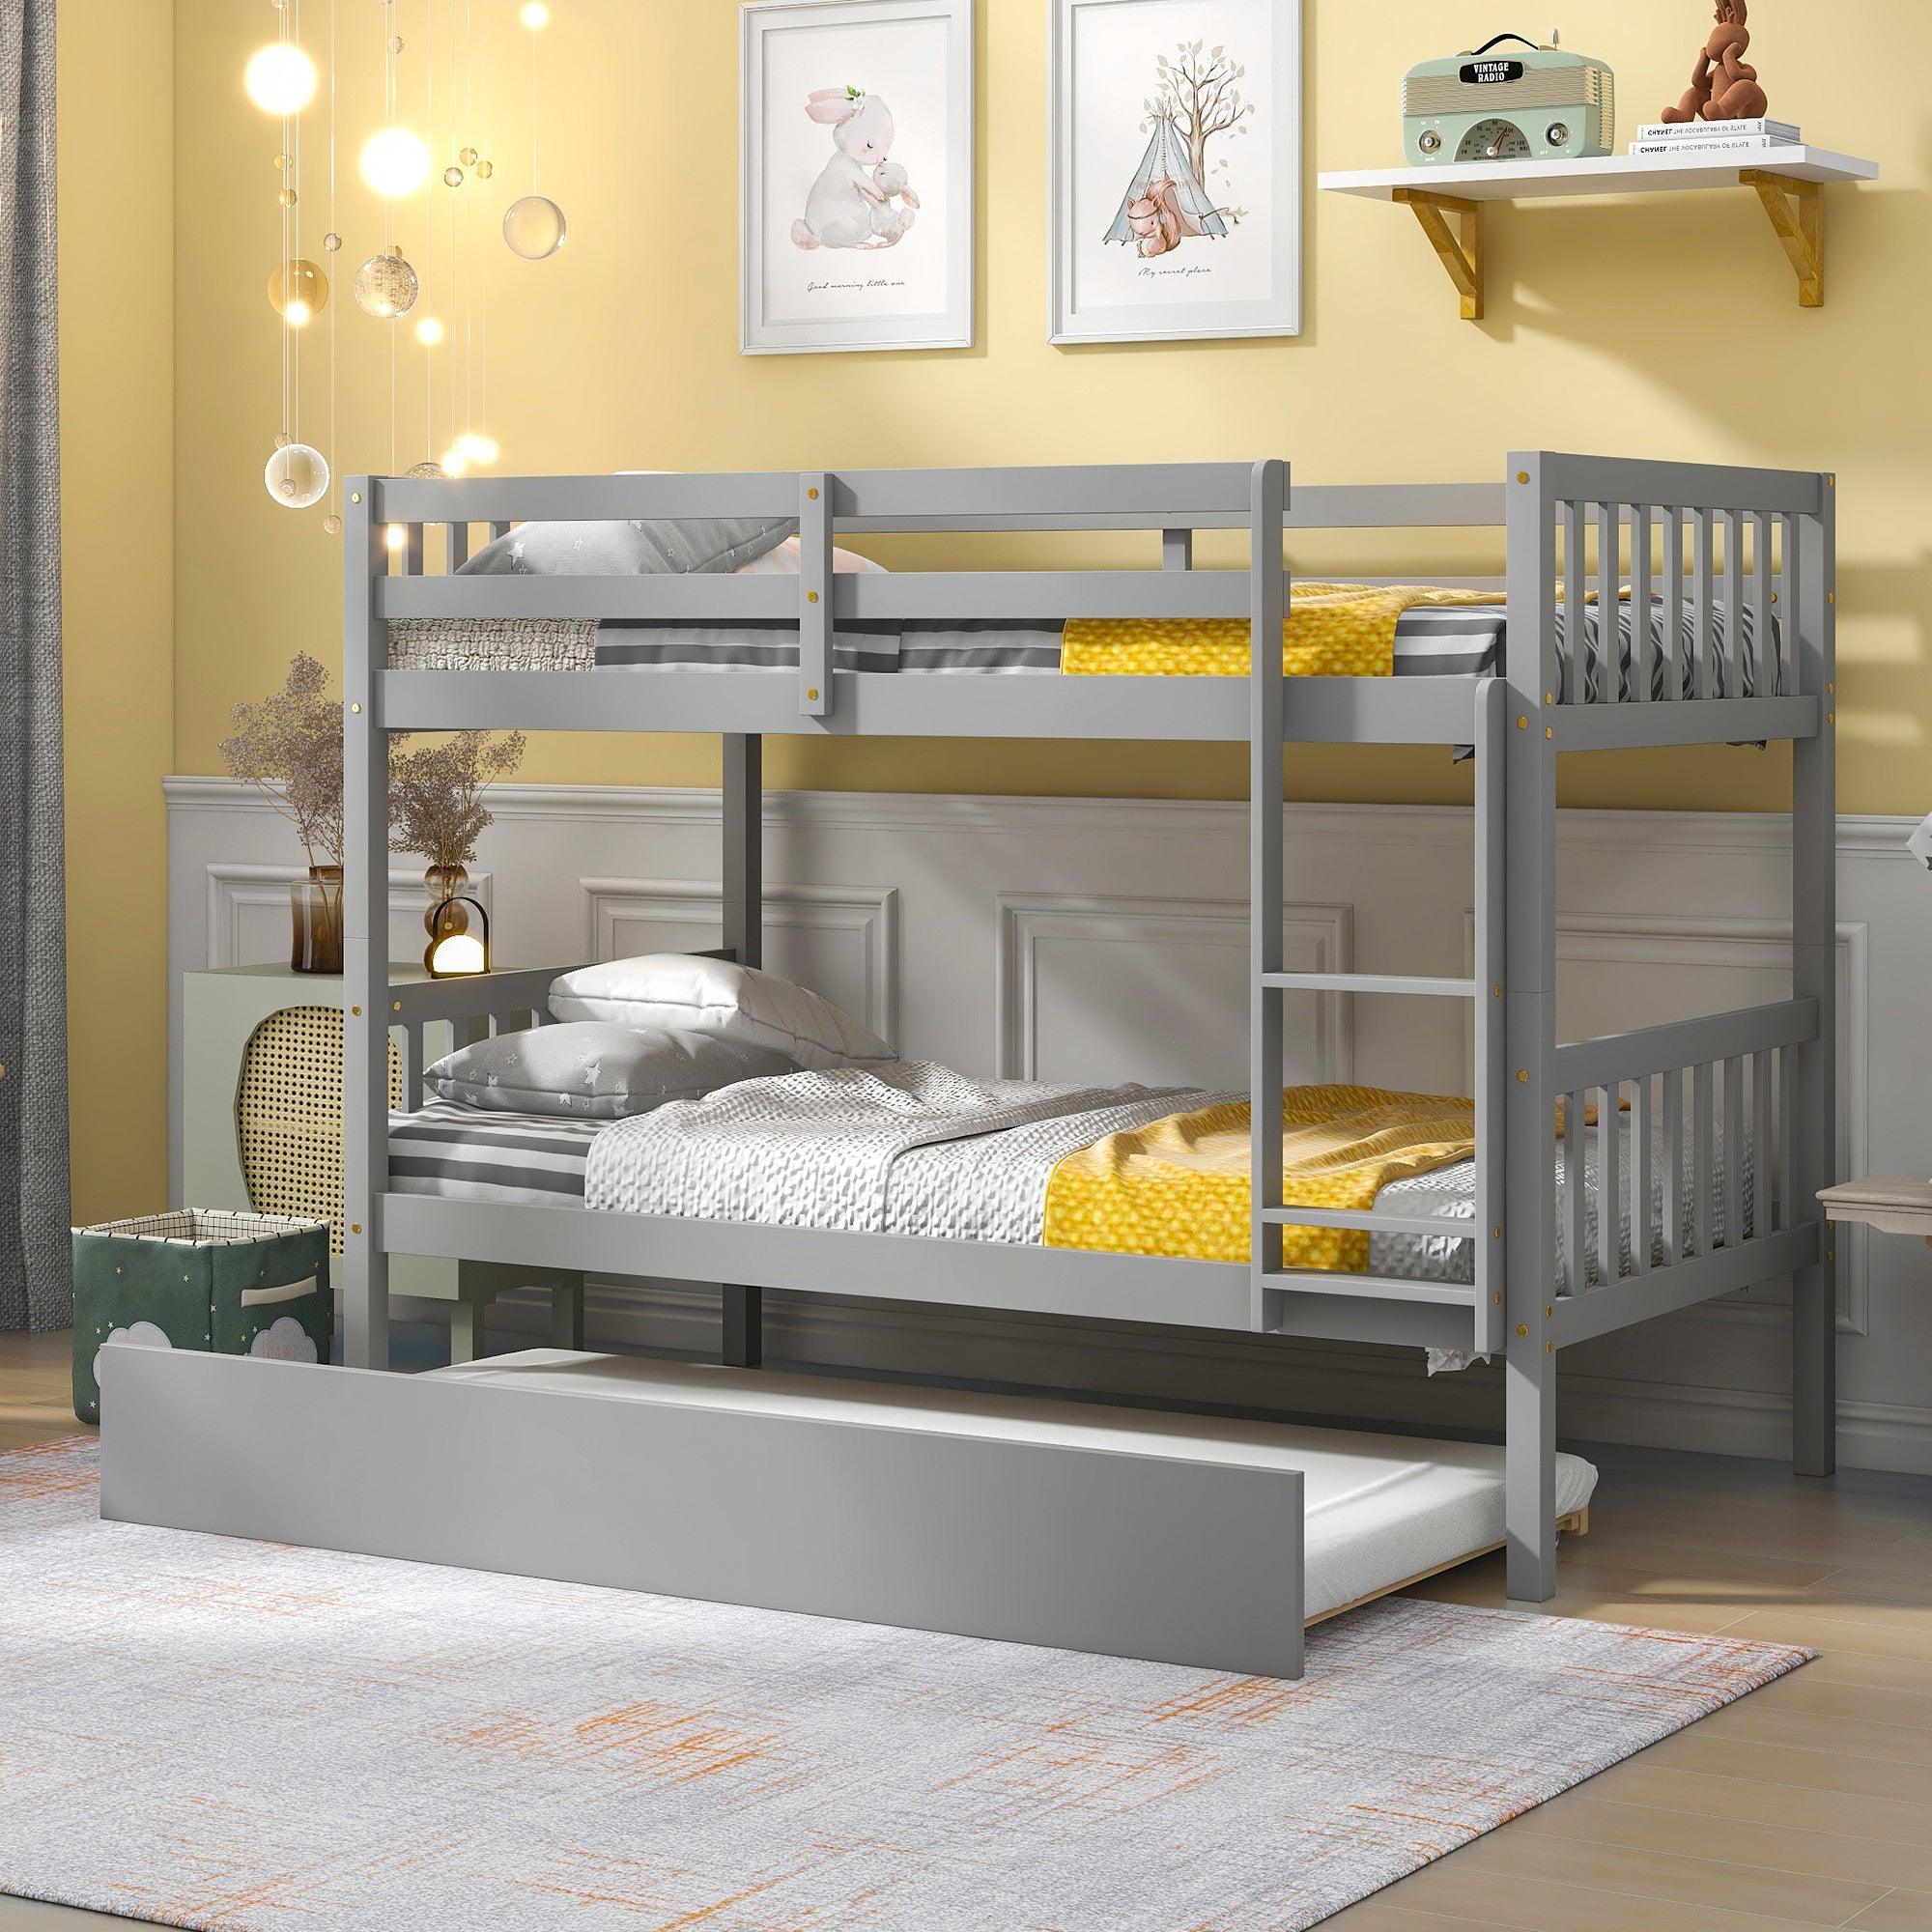 🆓🚛 Twin Over Twin Bunk Beds With Trundle, Solid Wood Trundle Bed Frame With Safety Rail & Ladder, Kids/Teens Bedroom, Guest Room Furniture, Can Be Converted Into 2 Beds, Gray